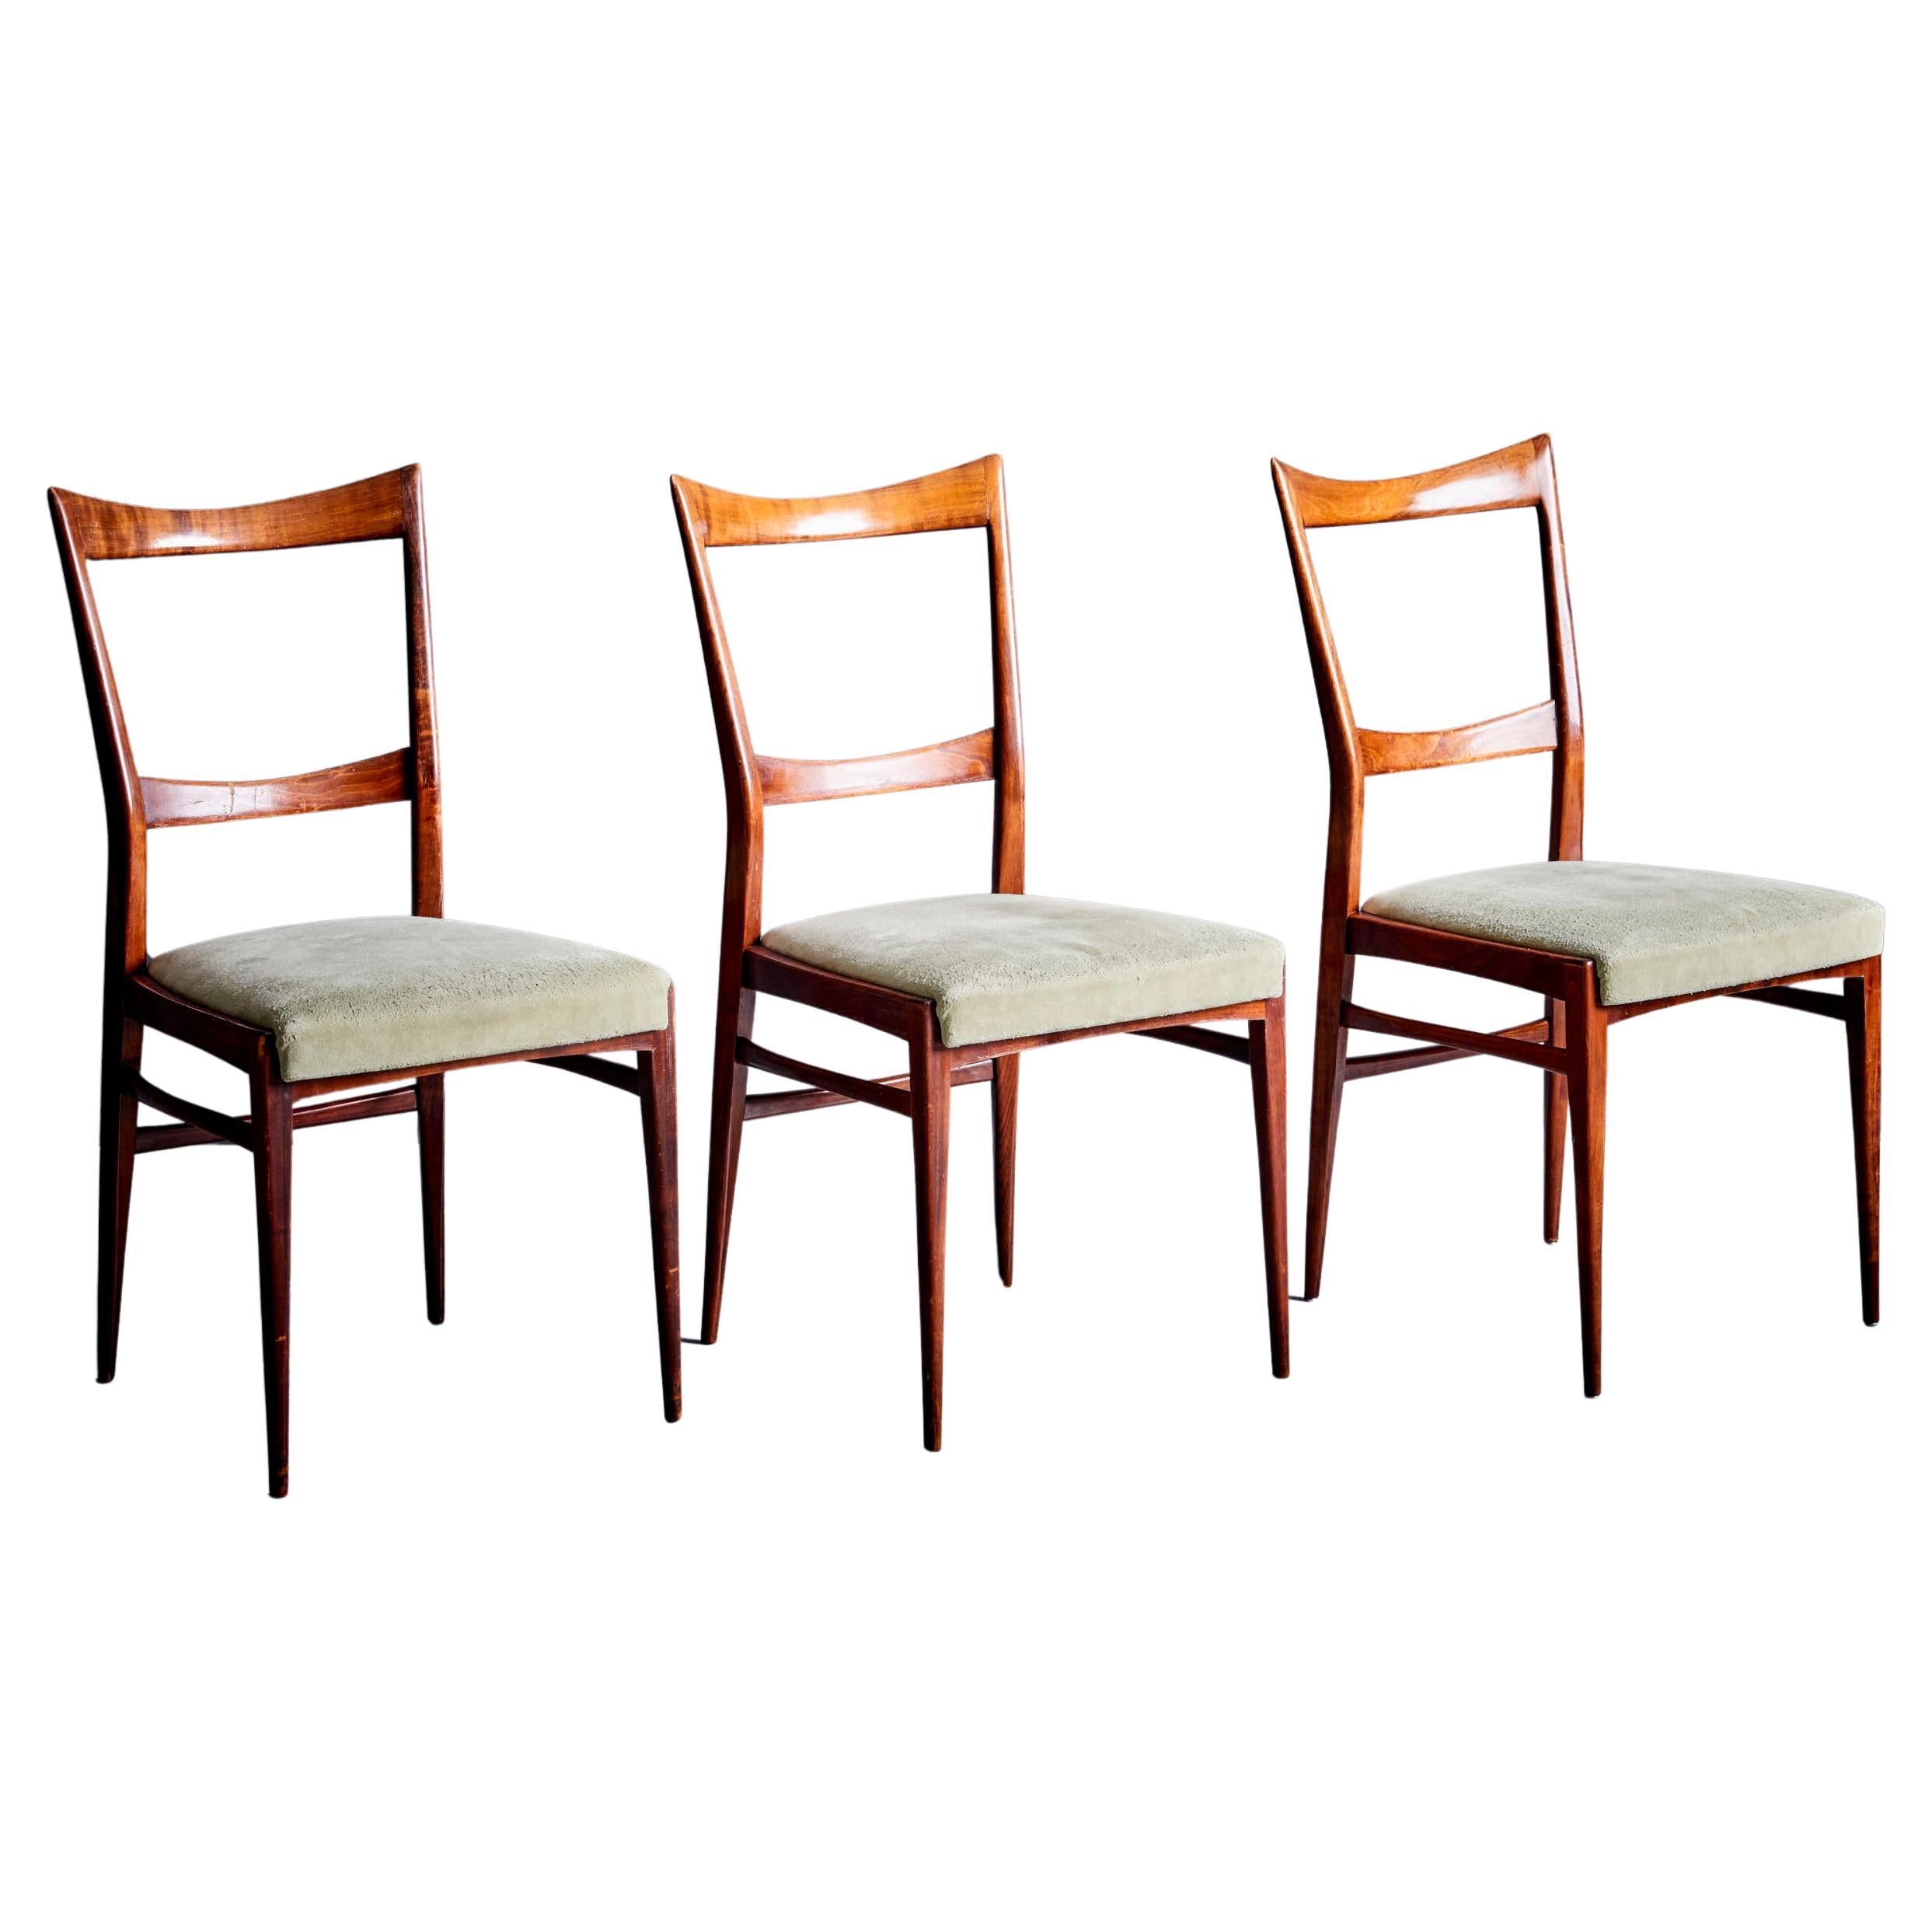 Set of 3 Mahogany Dining Chairs in the manner of Ico Parisi 1960s For Sale